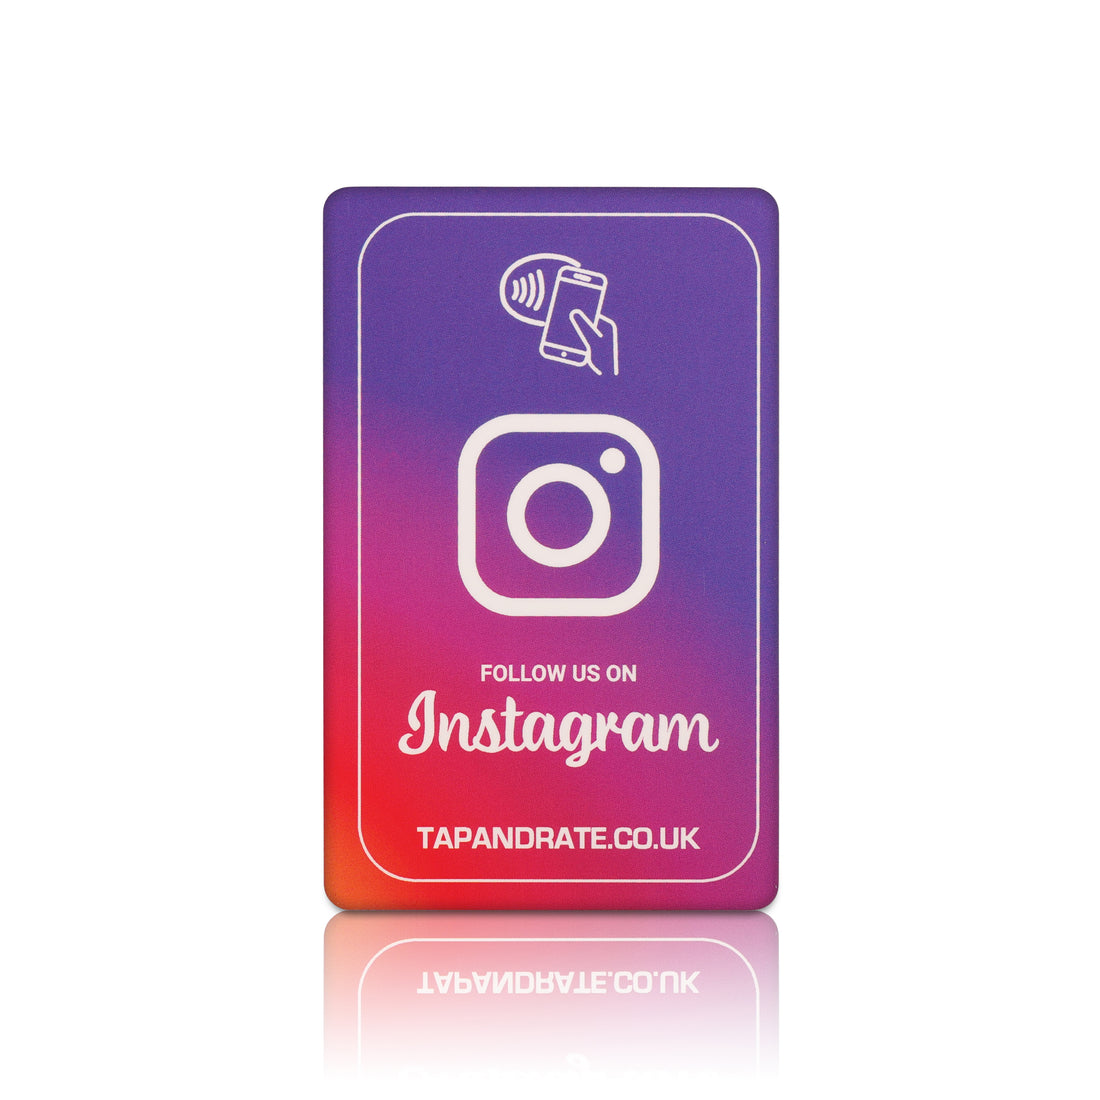 Smart Instagram Card x 5 - Instagram Super Bundle - NFC Enabled Instagram Followers card. Best chip, premium quality. Customers can follow you and see your profile with just one simple tap. No searching or finding your account, comes linked to your account so all the customer has to do is tap their phone and follow your profile. Ready to use out of the box! Start getting more followers today. Get more Customer with this simple to use product. Tap and Rate